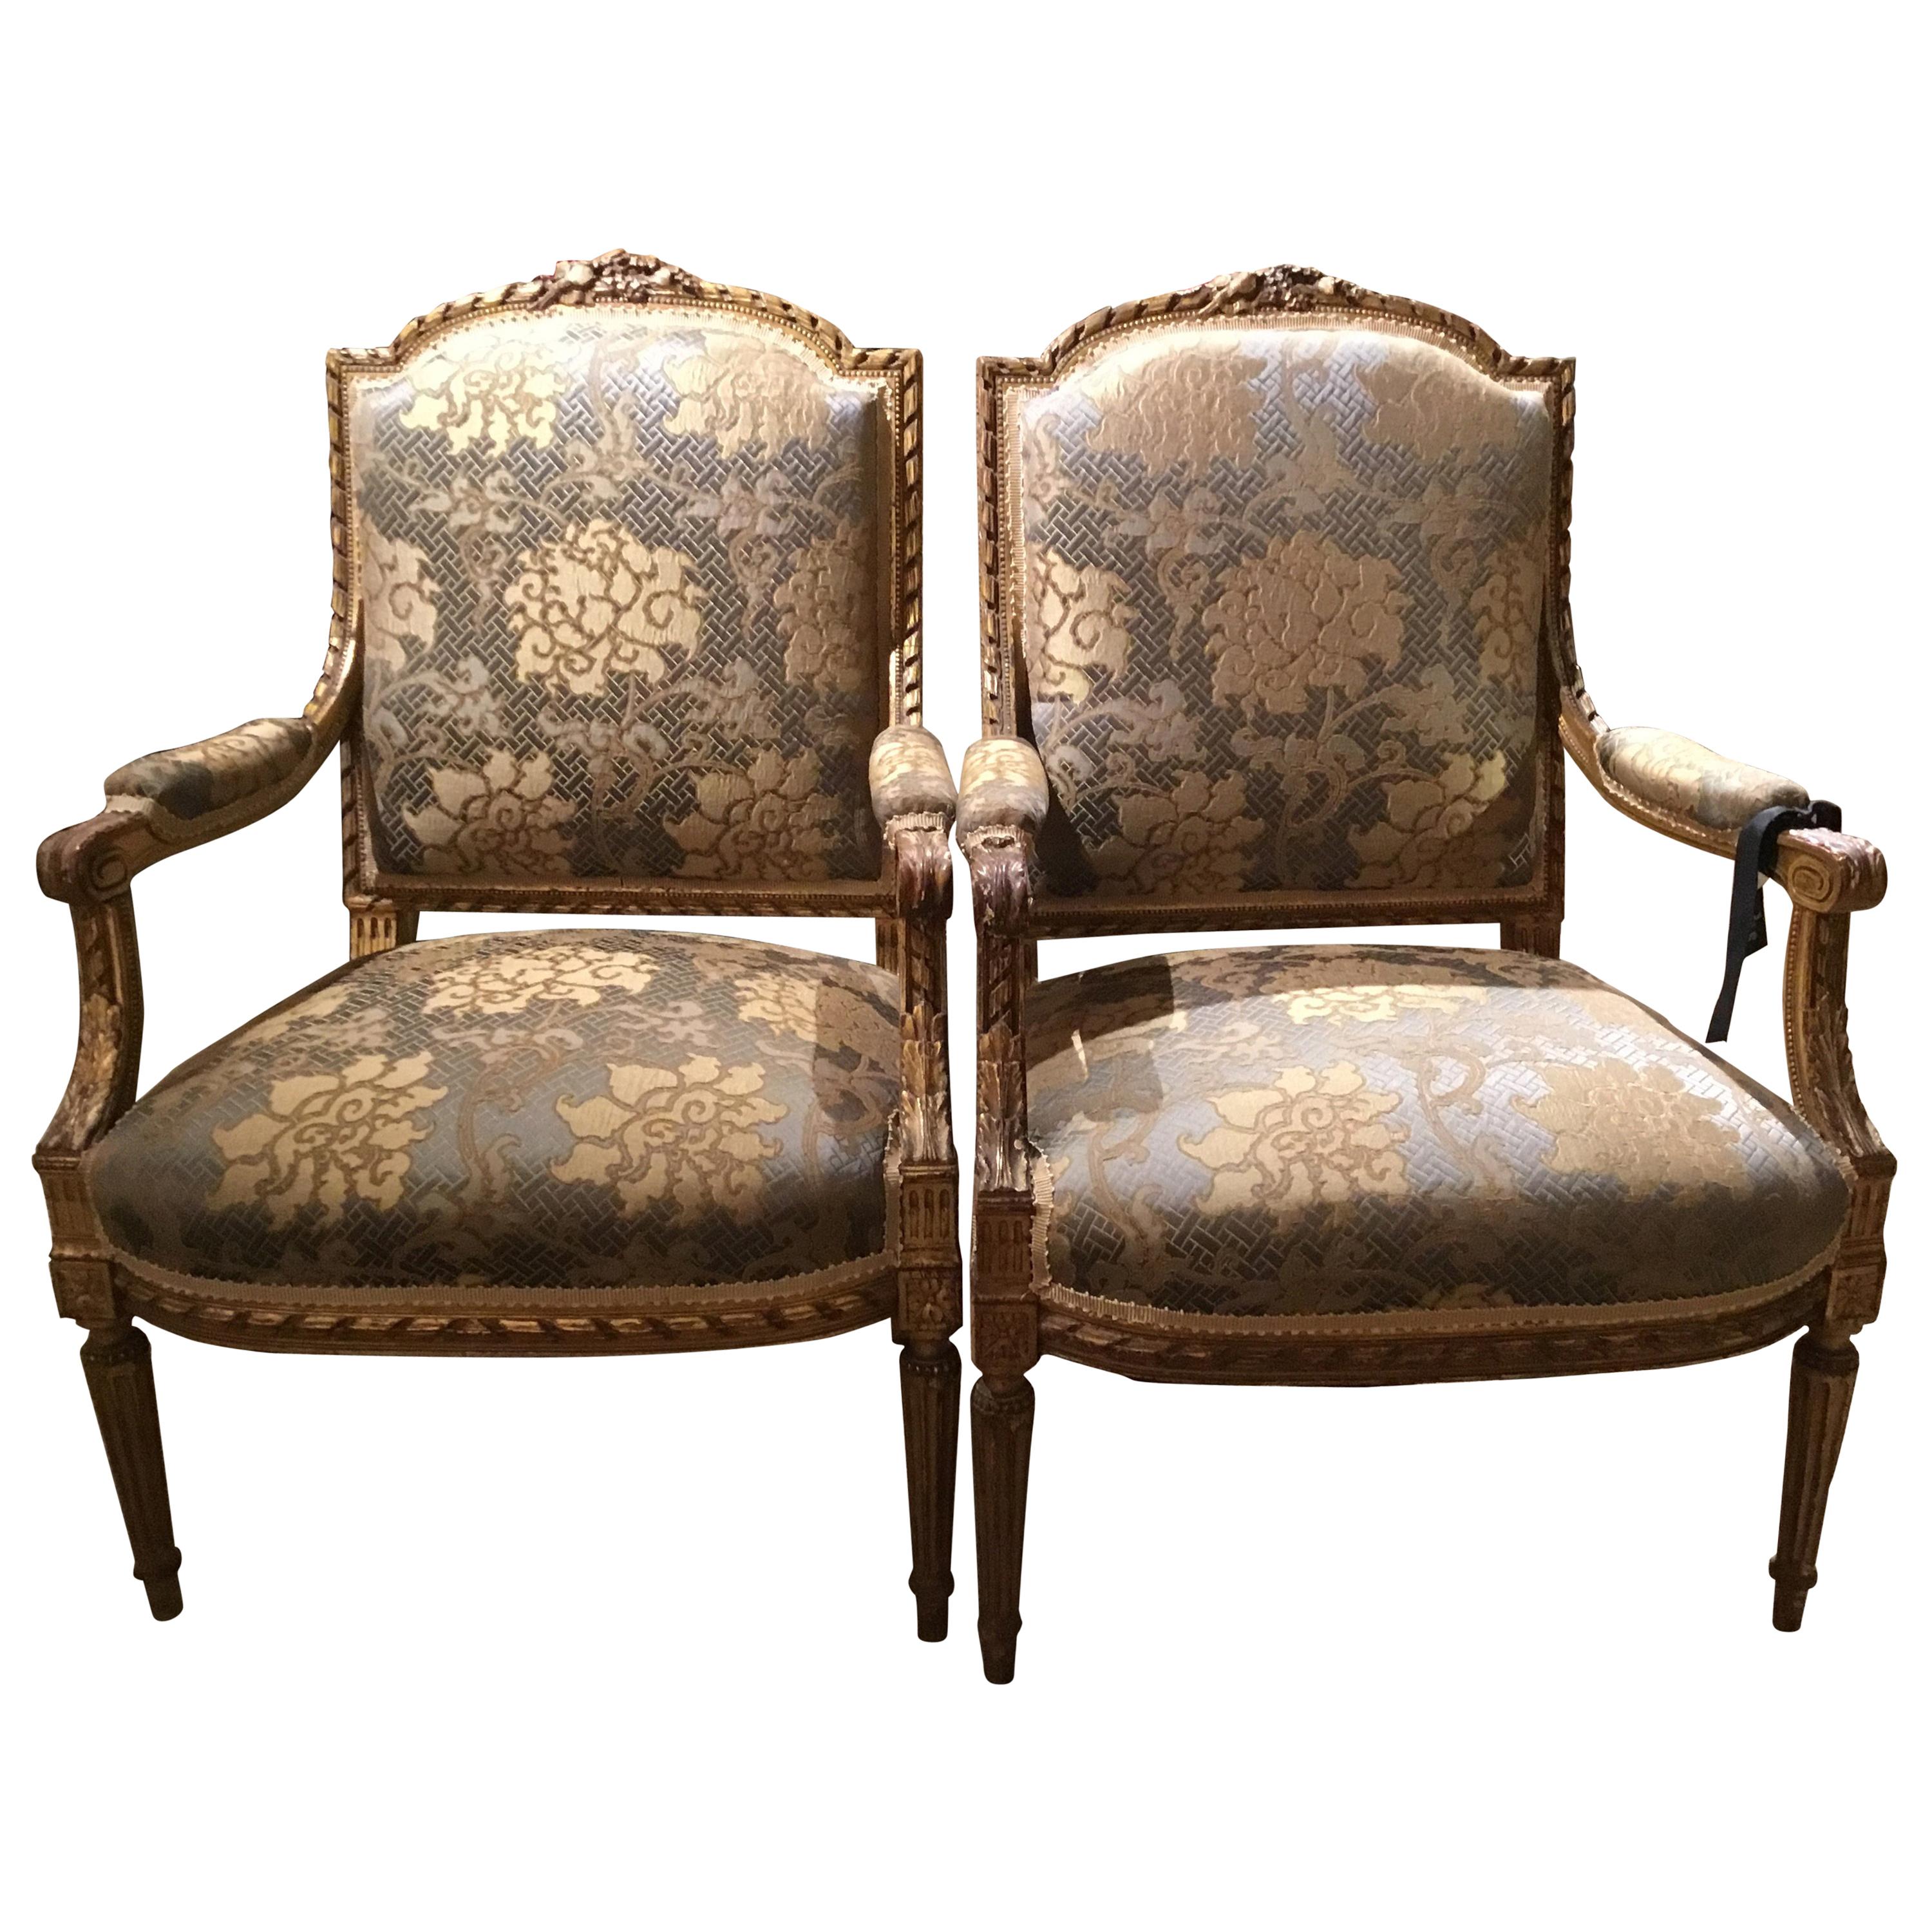 Louis XVI Style Giltwood Fauteuils/Armchairs, 19th Century with Domed Back, Pair